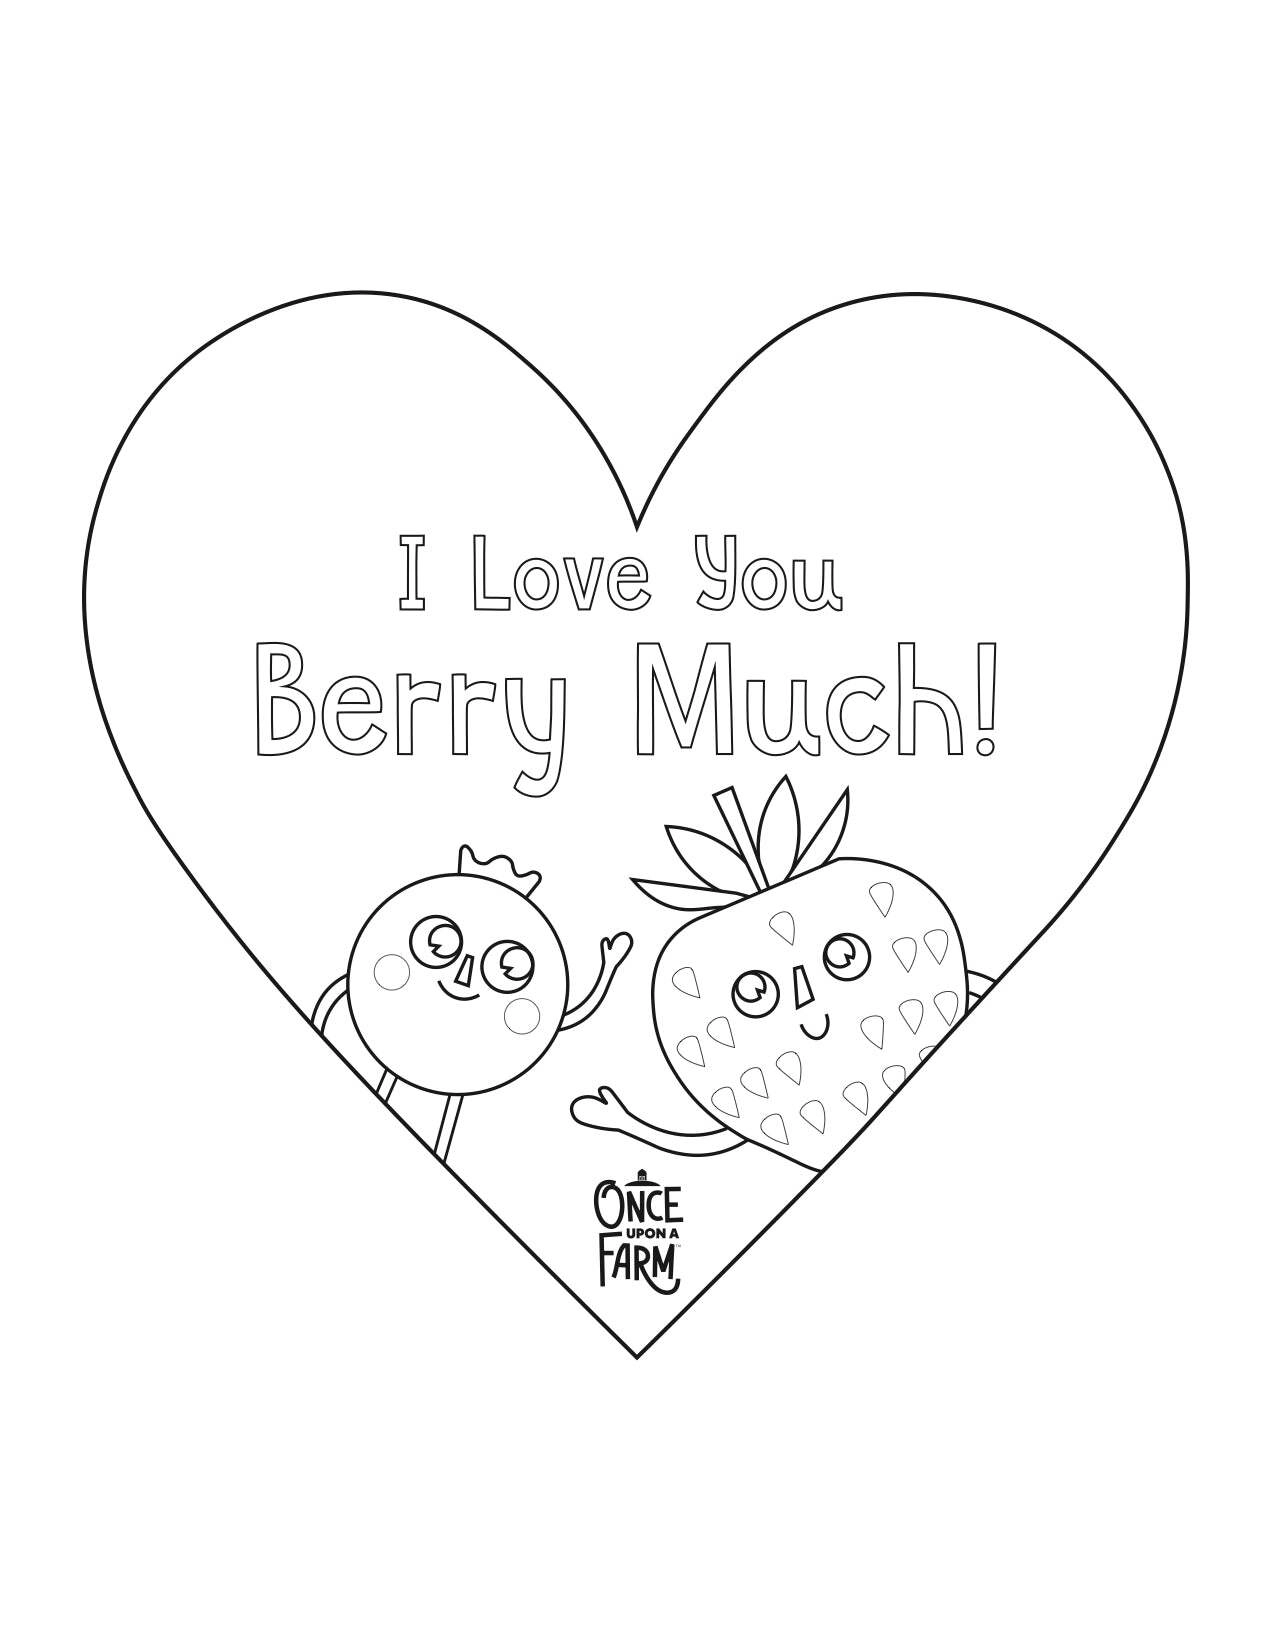 Printable valentines day coloring page â once upon a farm